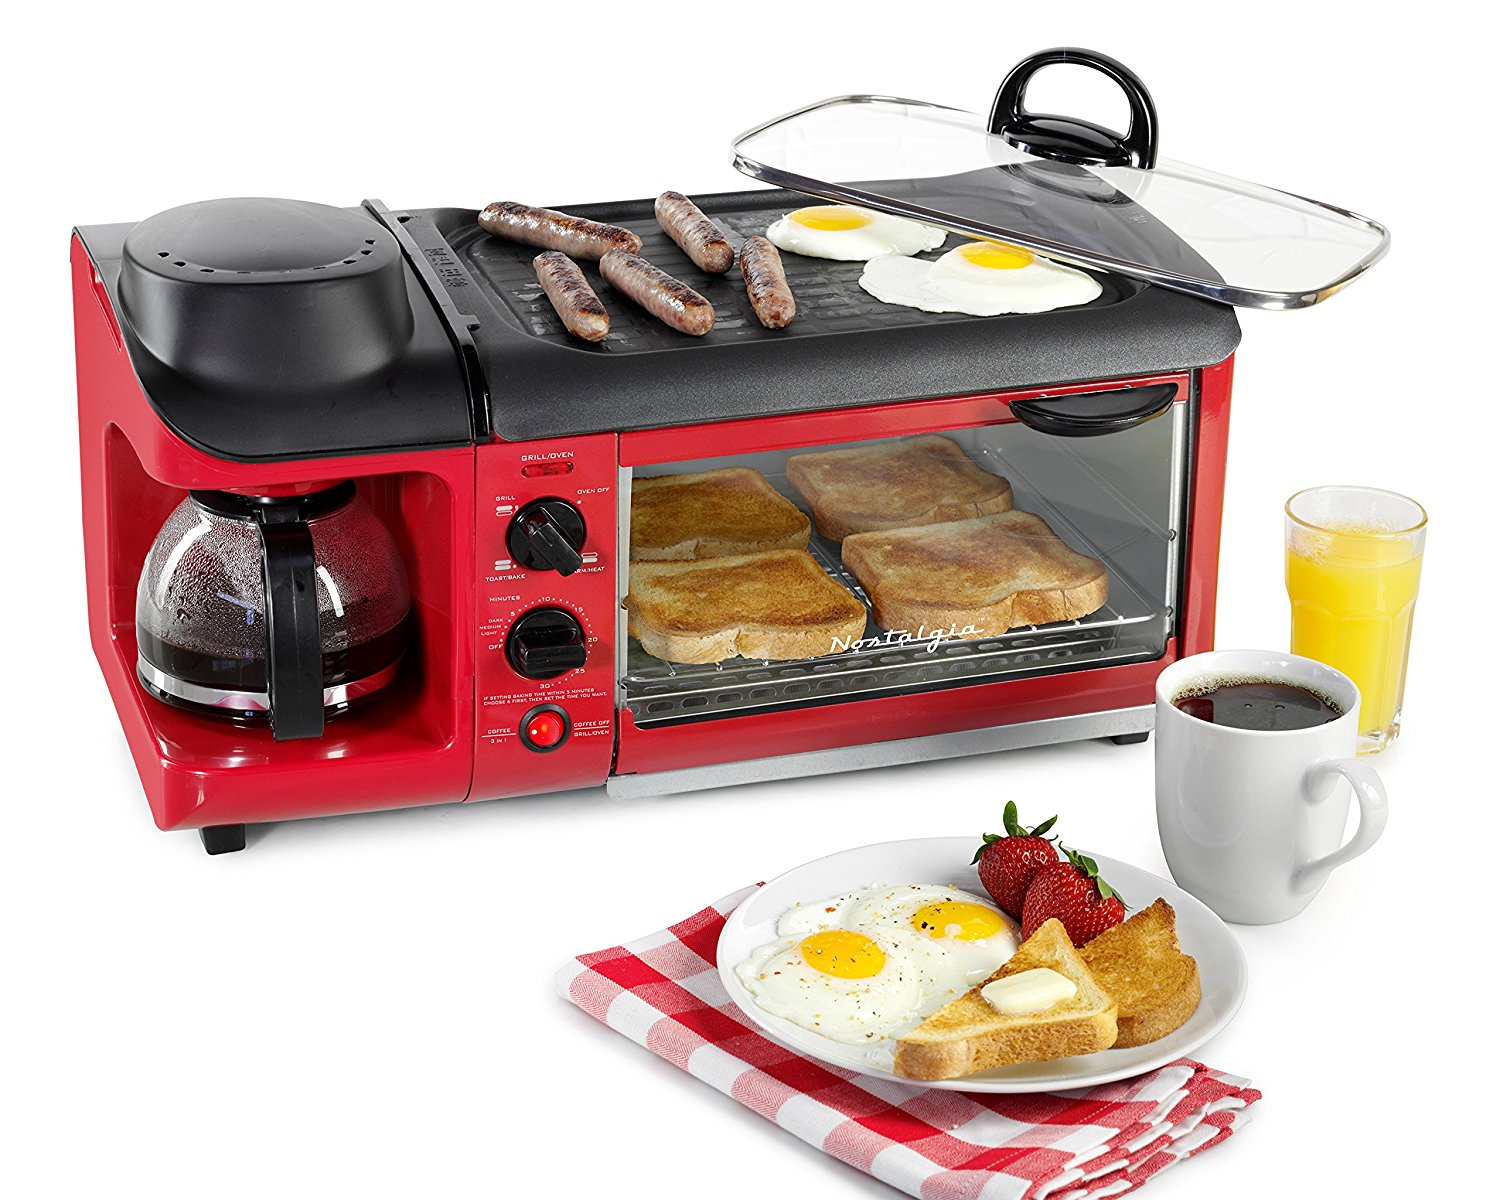 Your kitchen probably has too much junk in it. It's time to combine.<br><br>Streamline your breakfast with the three-in-one kitchen gadget available <a href="https://amzn.to/2Cr0prA" target="_blank" "nofollow">here</a>.